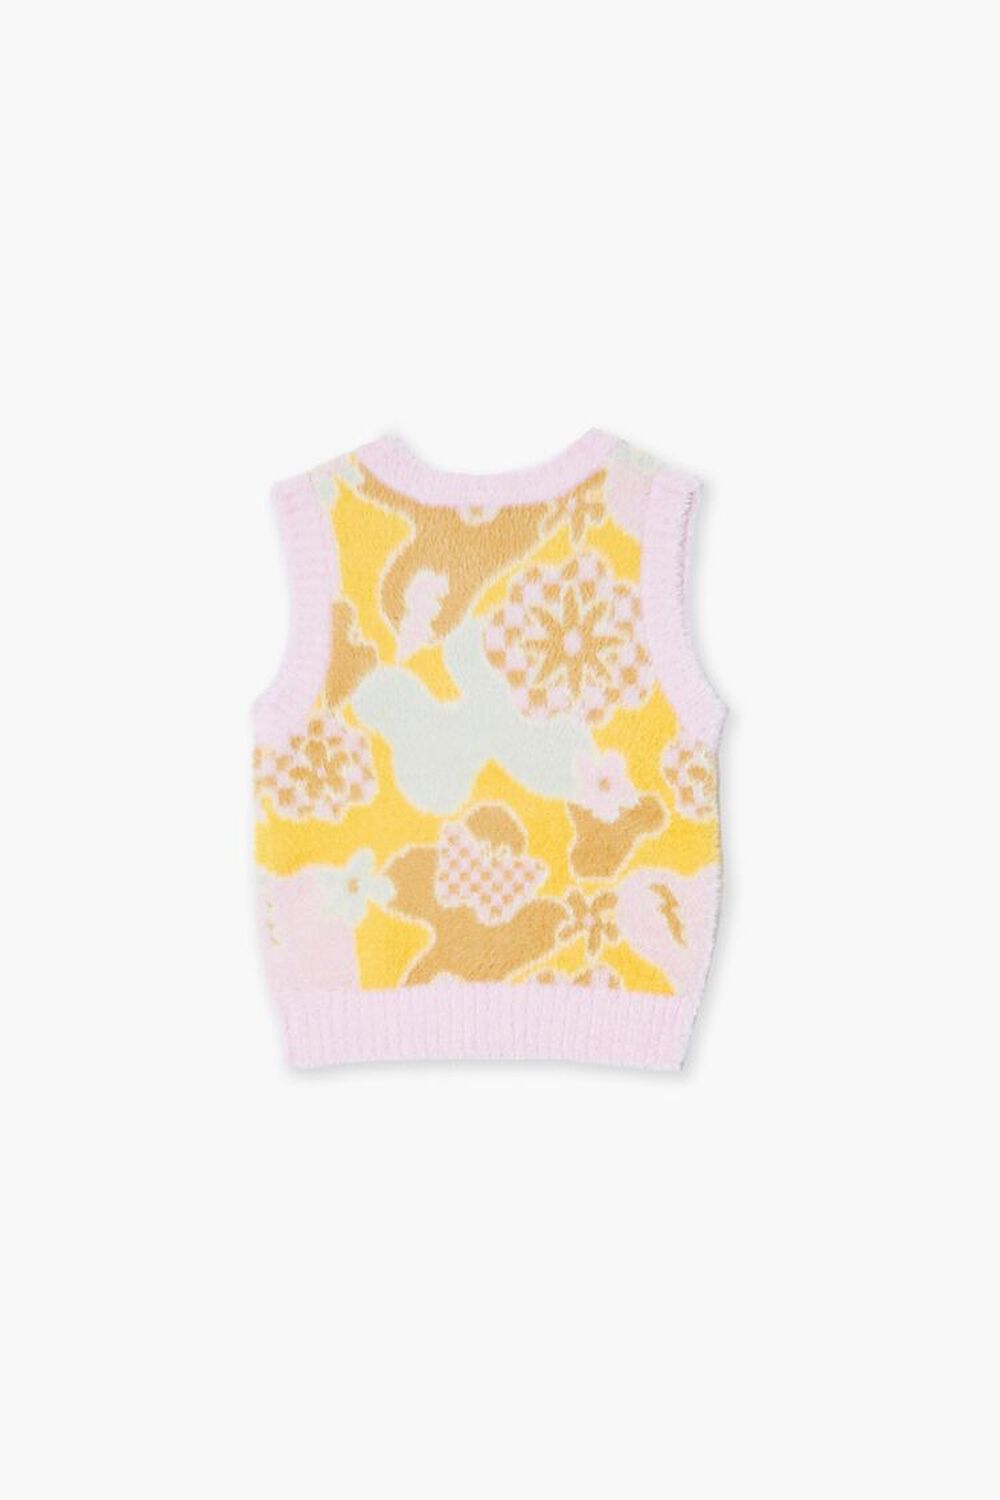 BUBBLE GUM/MULTI Girls Fuzzy Abstract Floral Sweater Vest (Kids), image 2